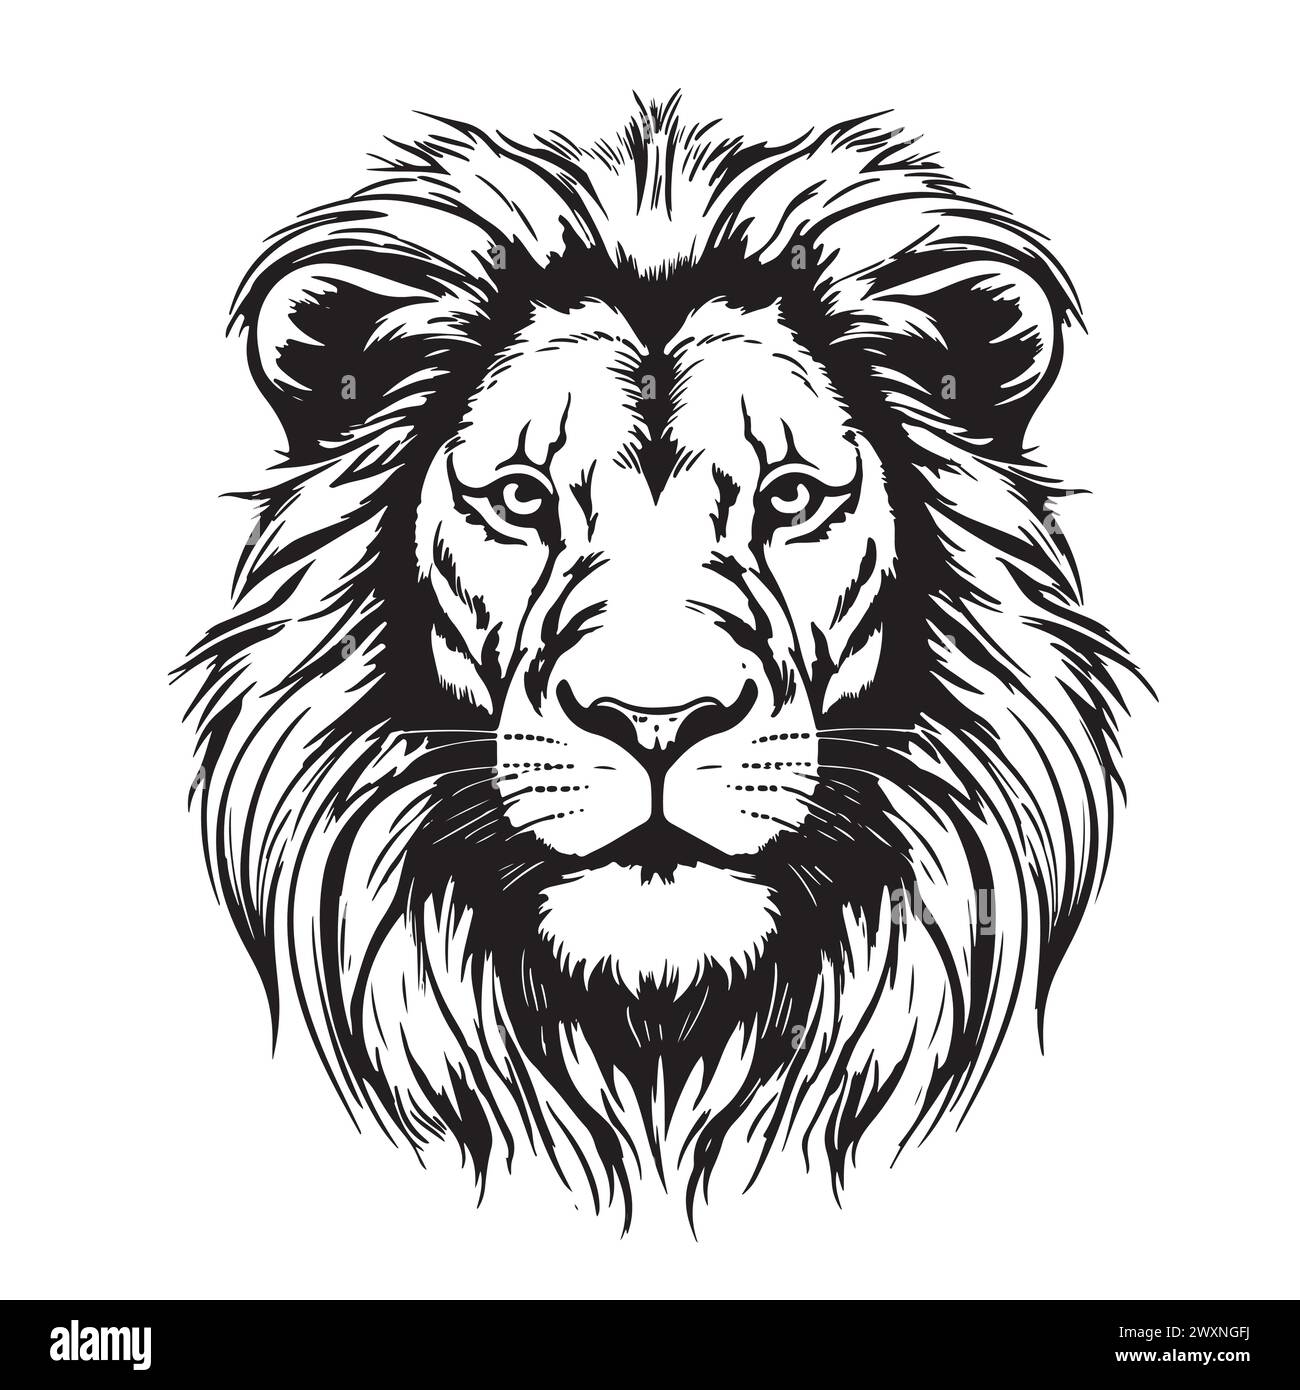 Lion. Sketchy, graphical, black and white portrait of a lion head on a white background. Stock Vector